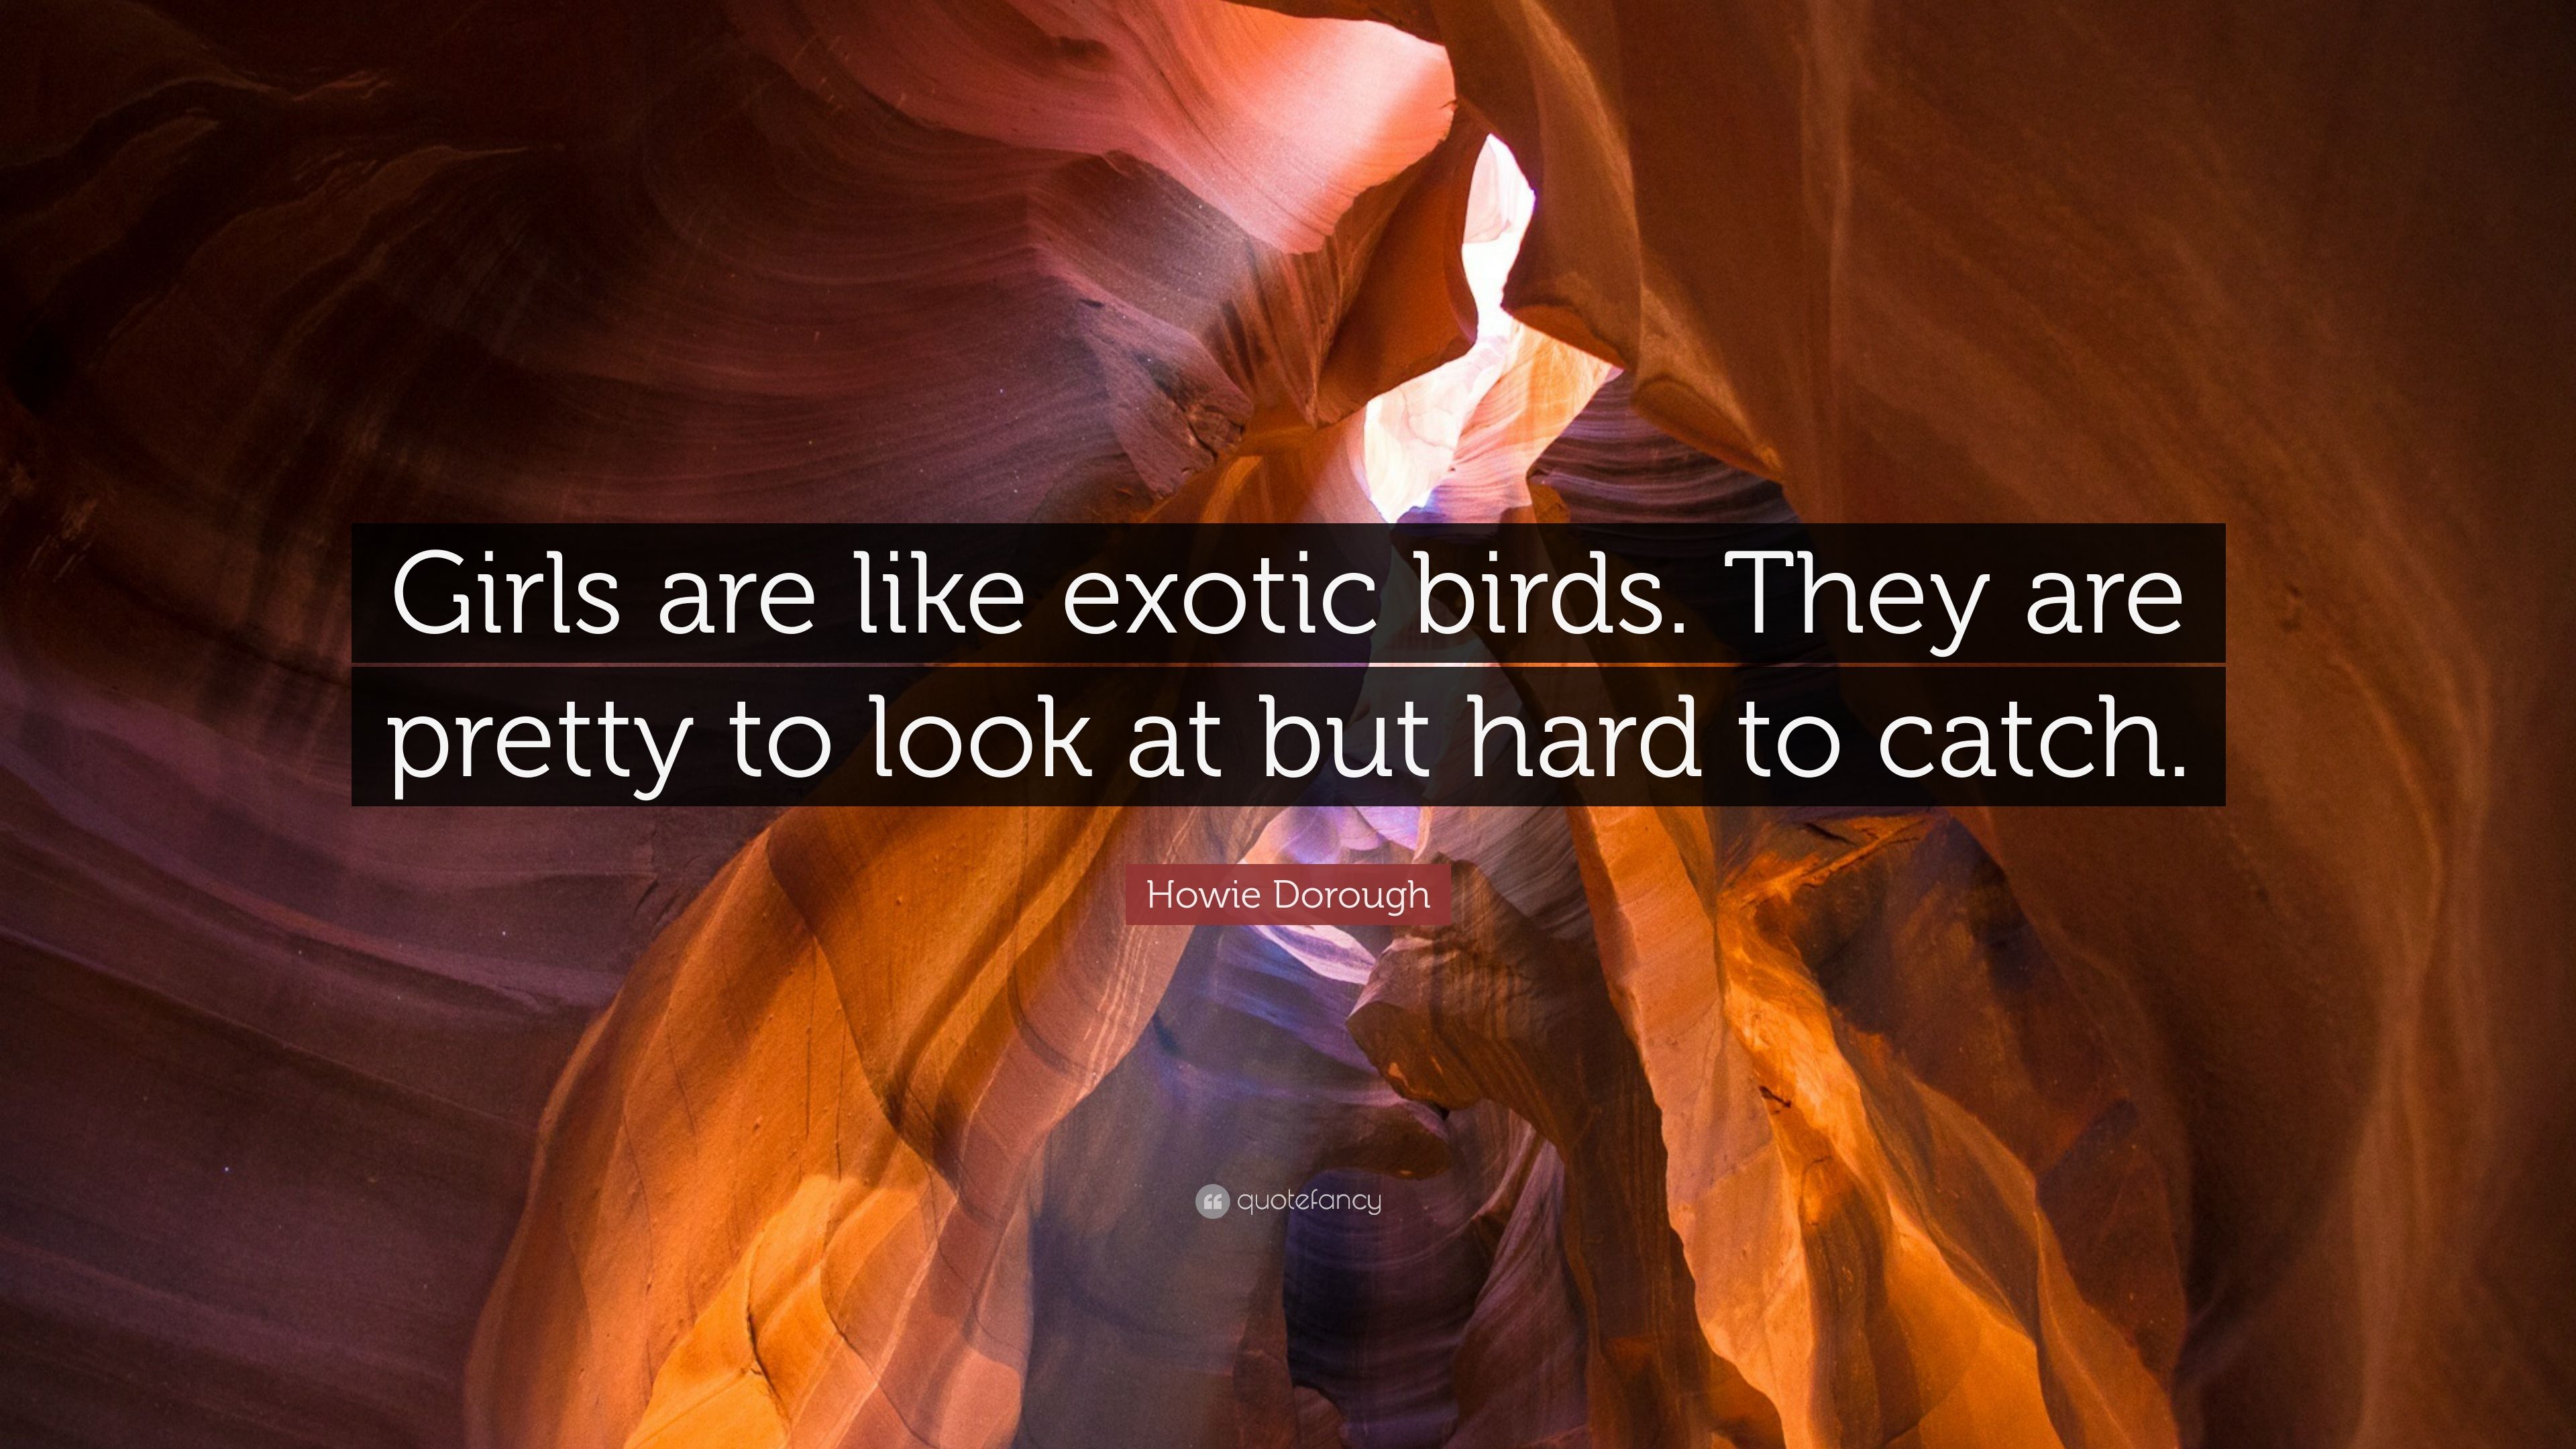 Howie Dorough Quote: “Girls are like exotic birds. They are pretty